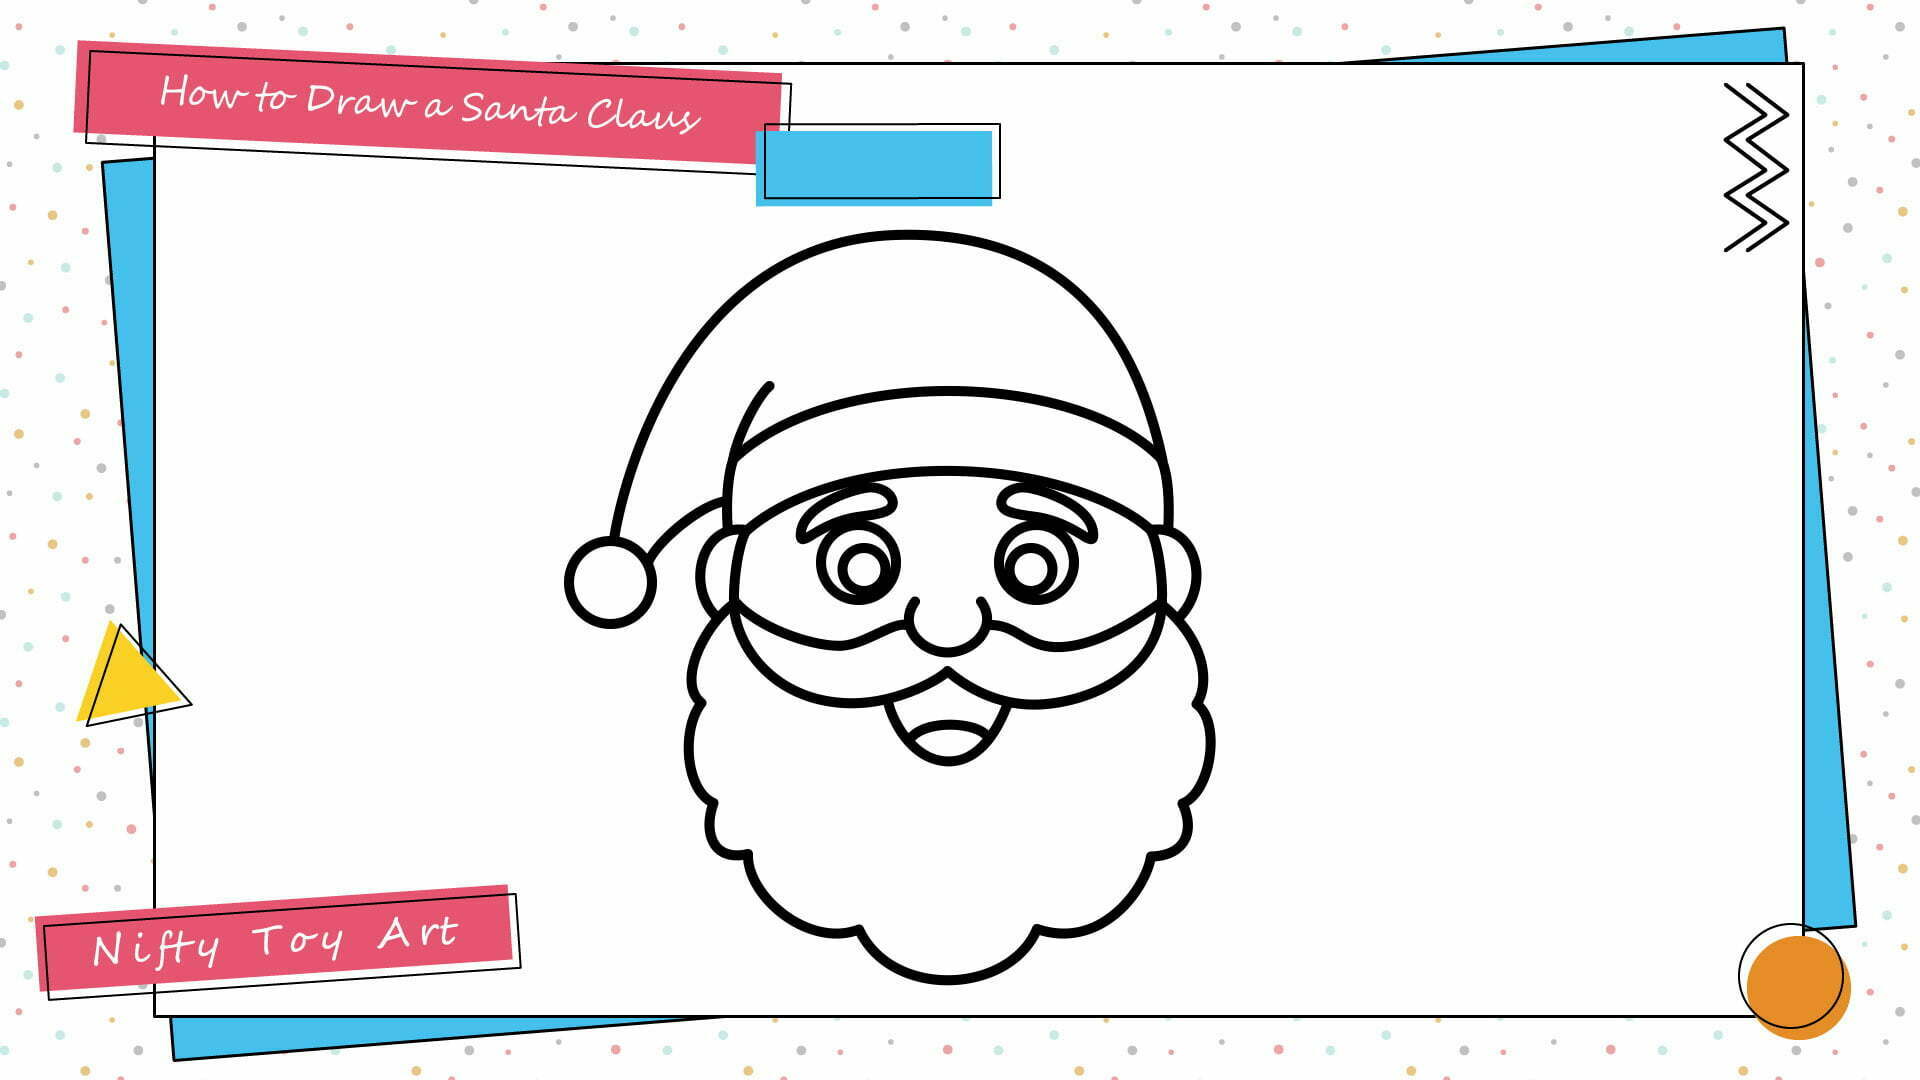 How to Draw Santa Claus Step By Step – For Kids & Beginners-saigonsouth.com.vn